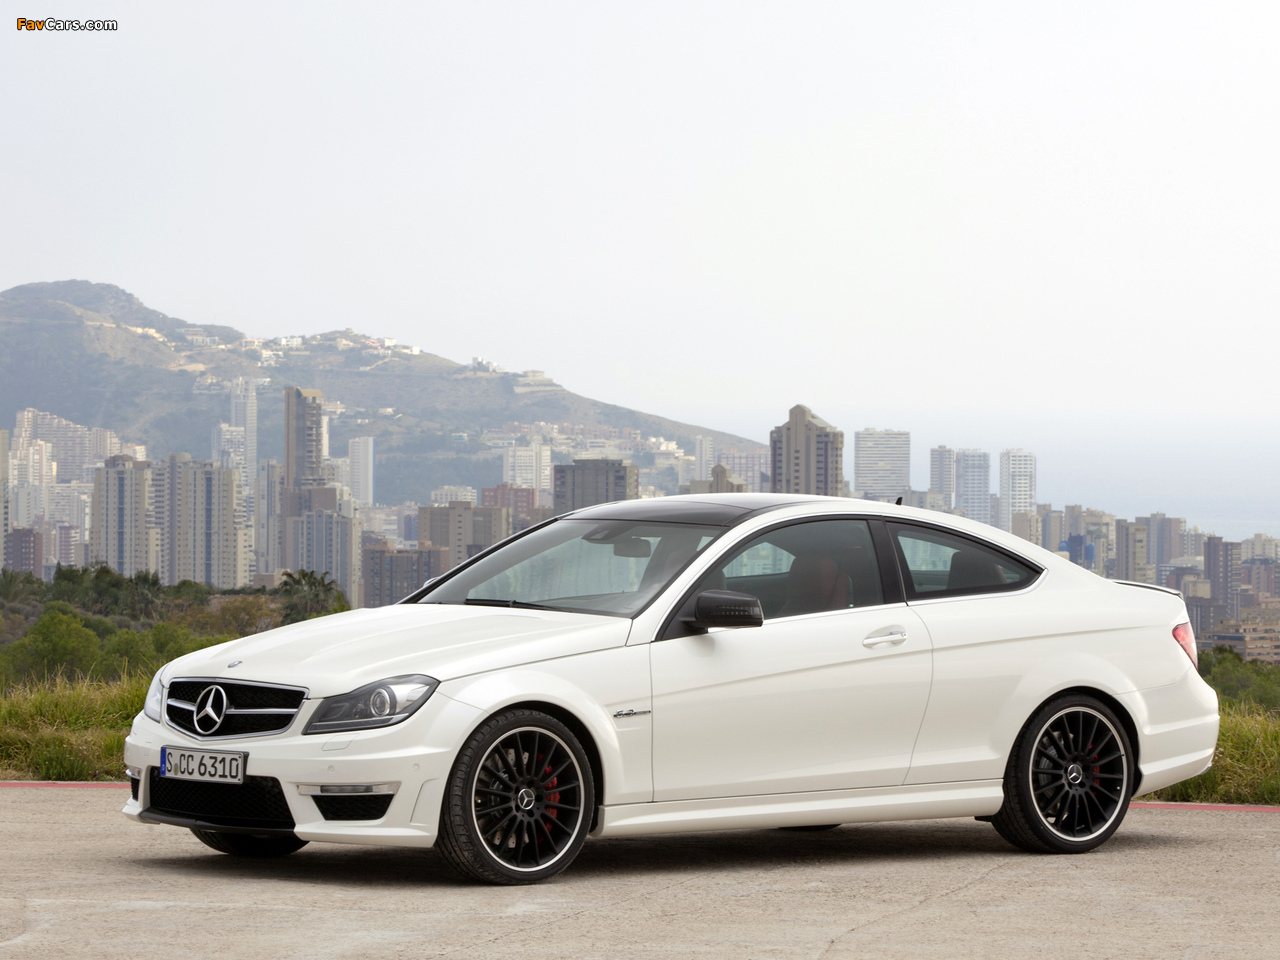 Mercedes-Benz C 63 AMG Coupe (C204) 2011 pictures (1280 x 960)